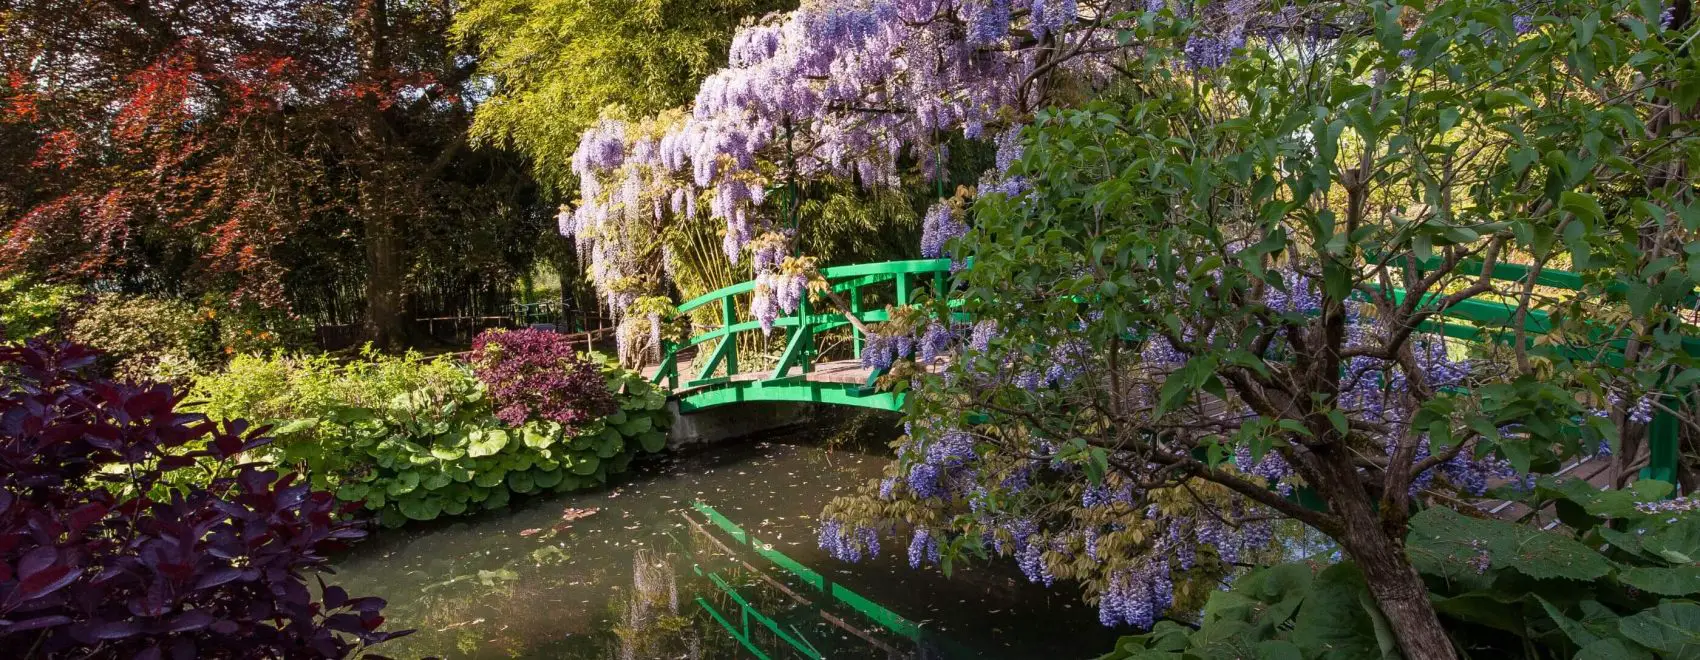 Things to see on a romantic day trip from Paris to Giverny